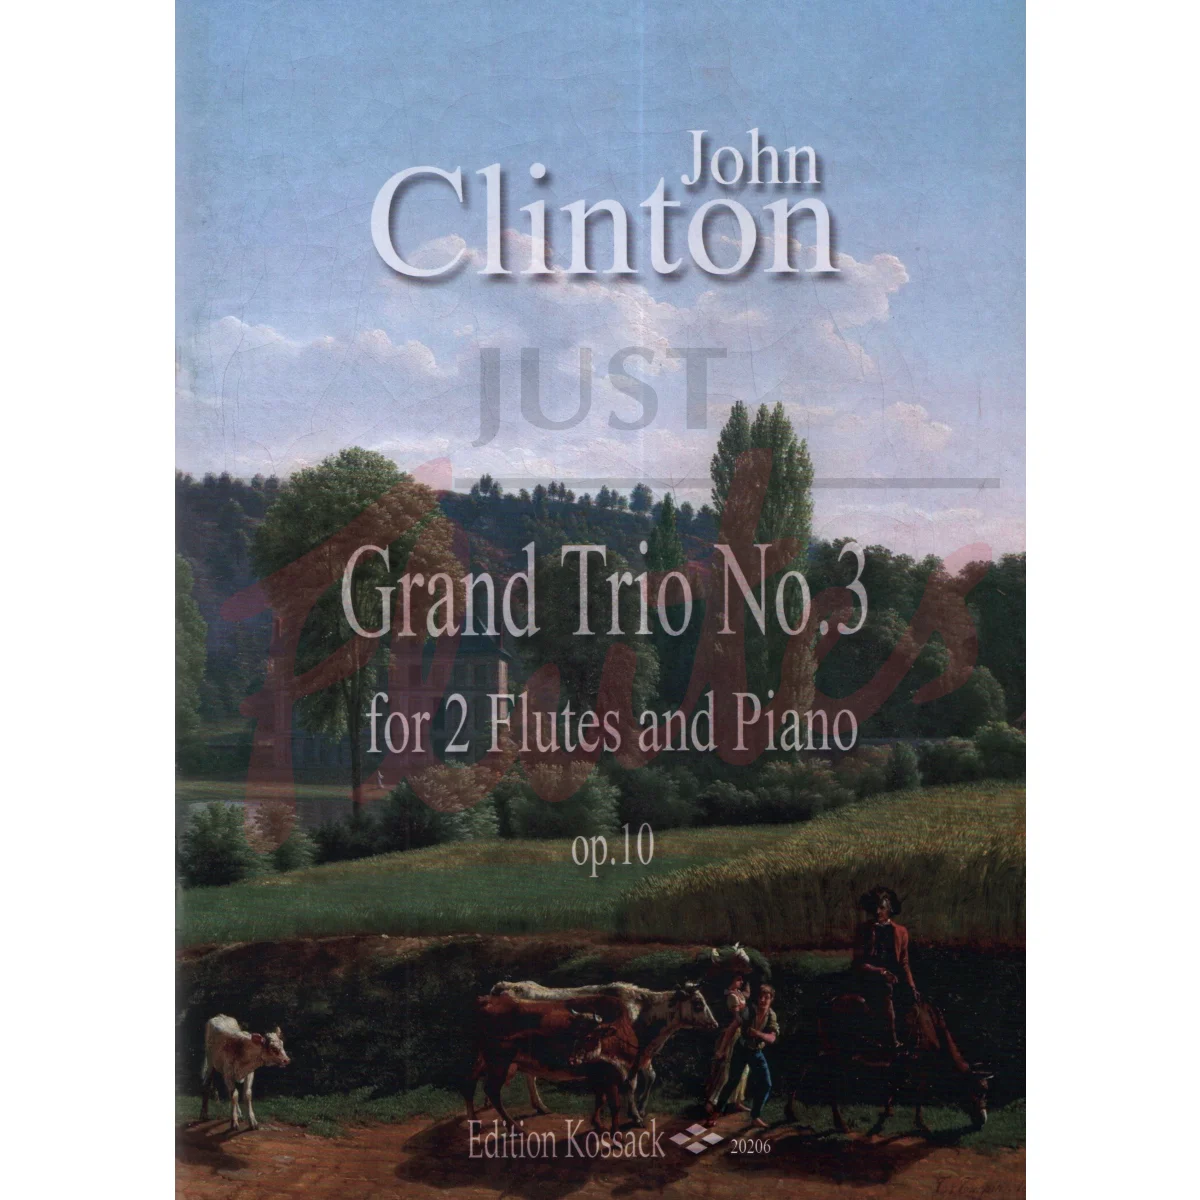 Grand Trio No. 3 for Two Flutes and Piano